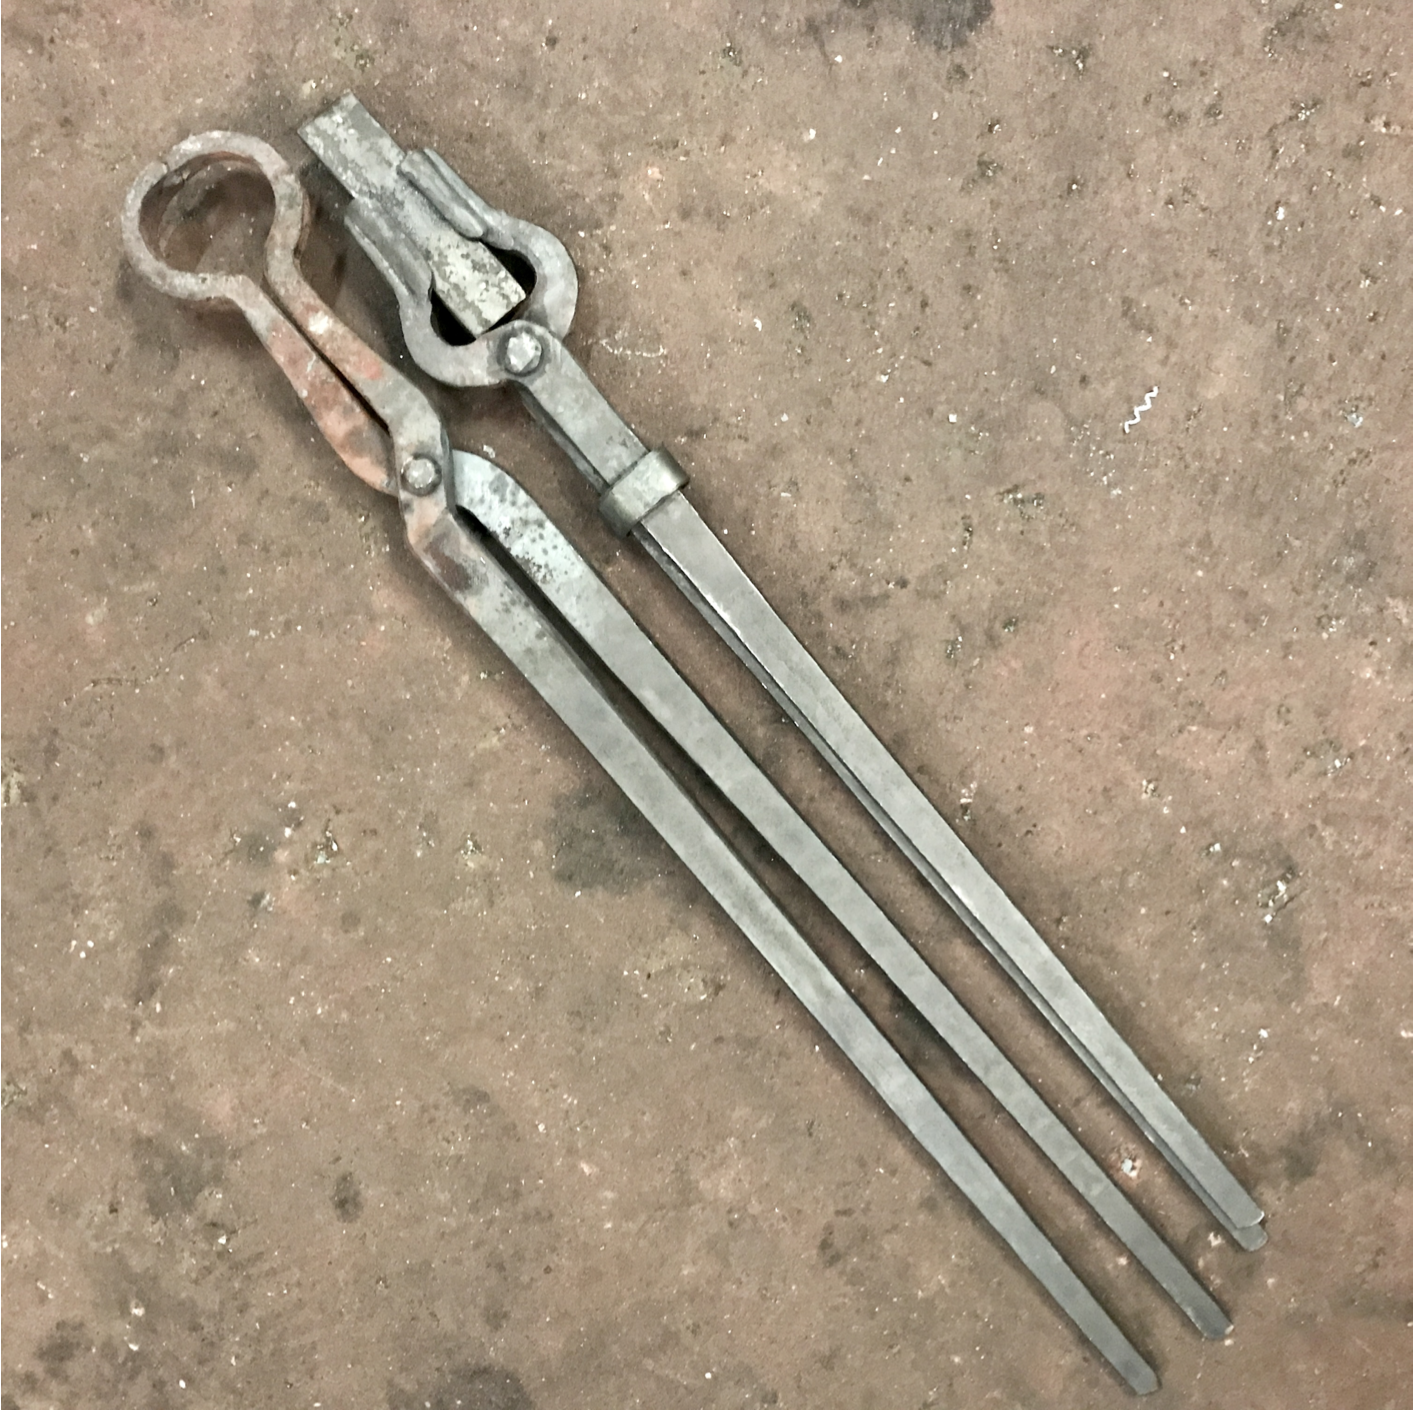 Goose Jaw Tongs Comparison